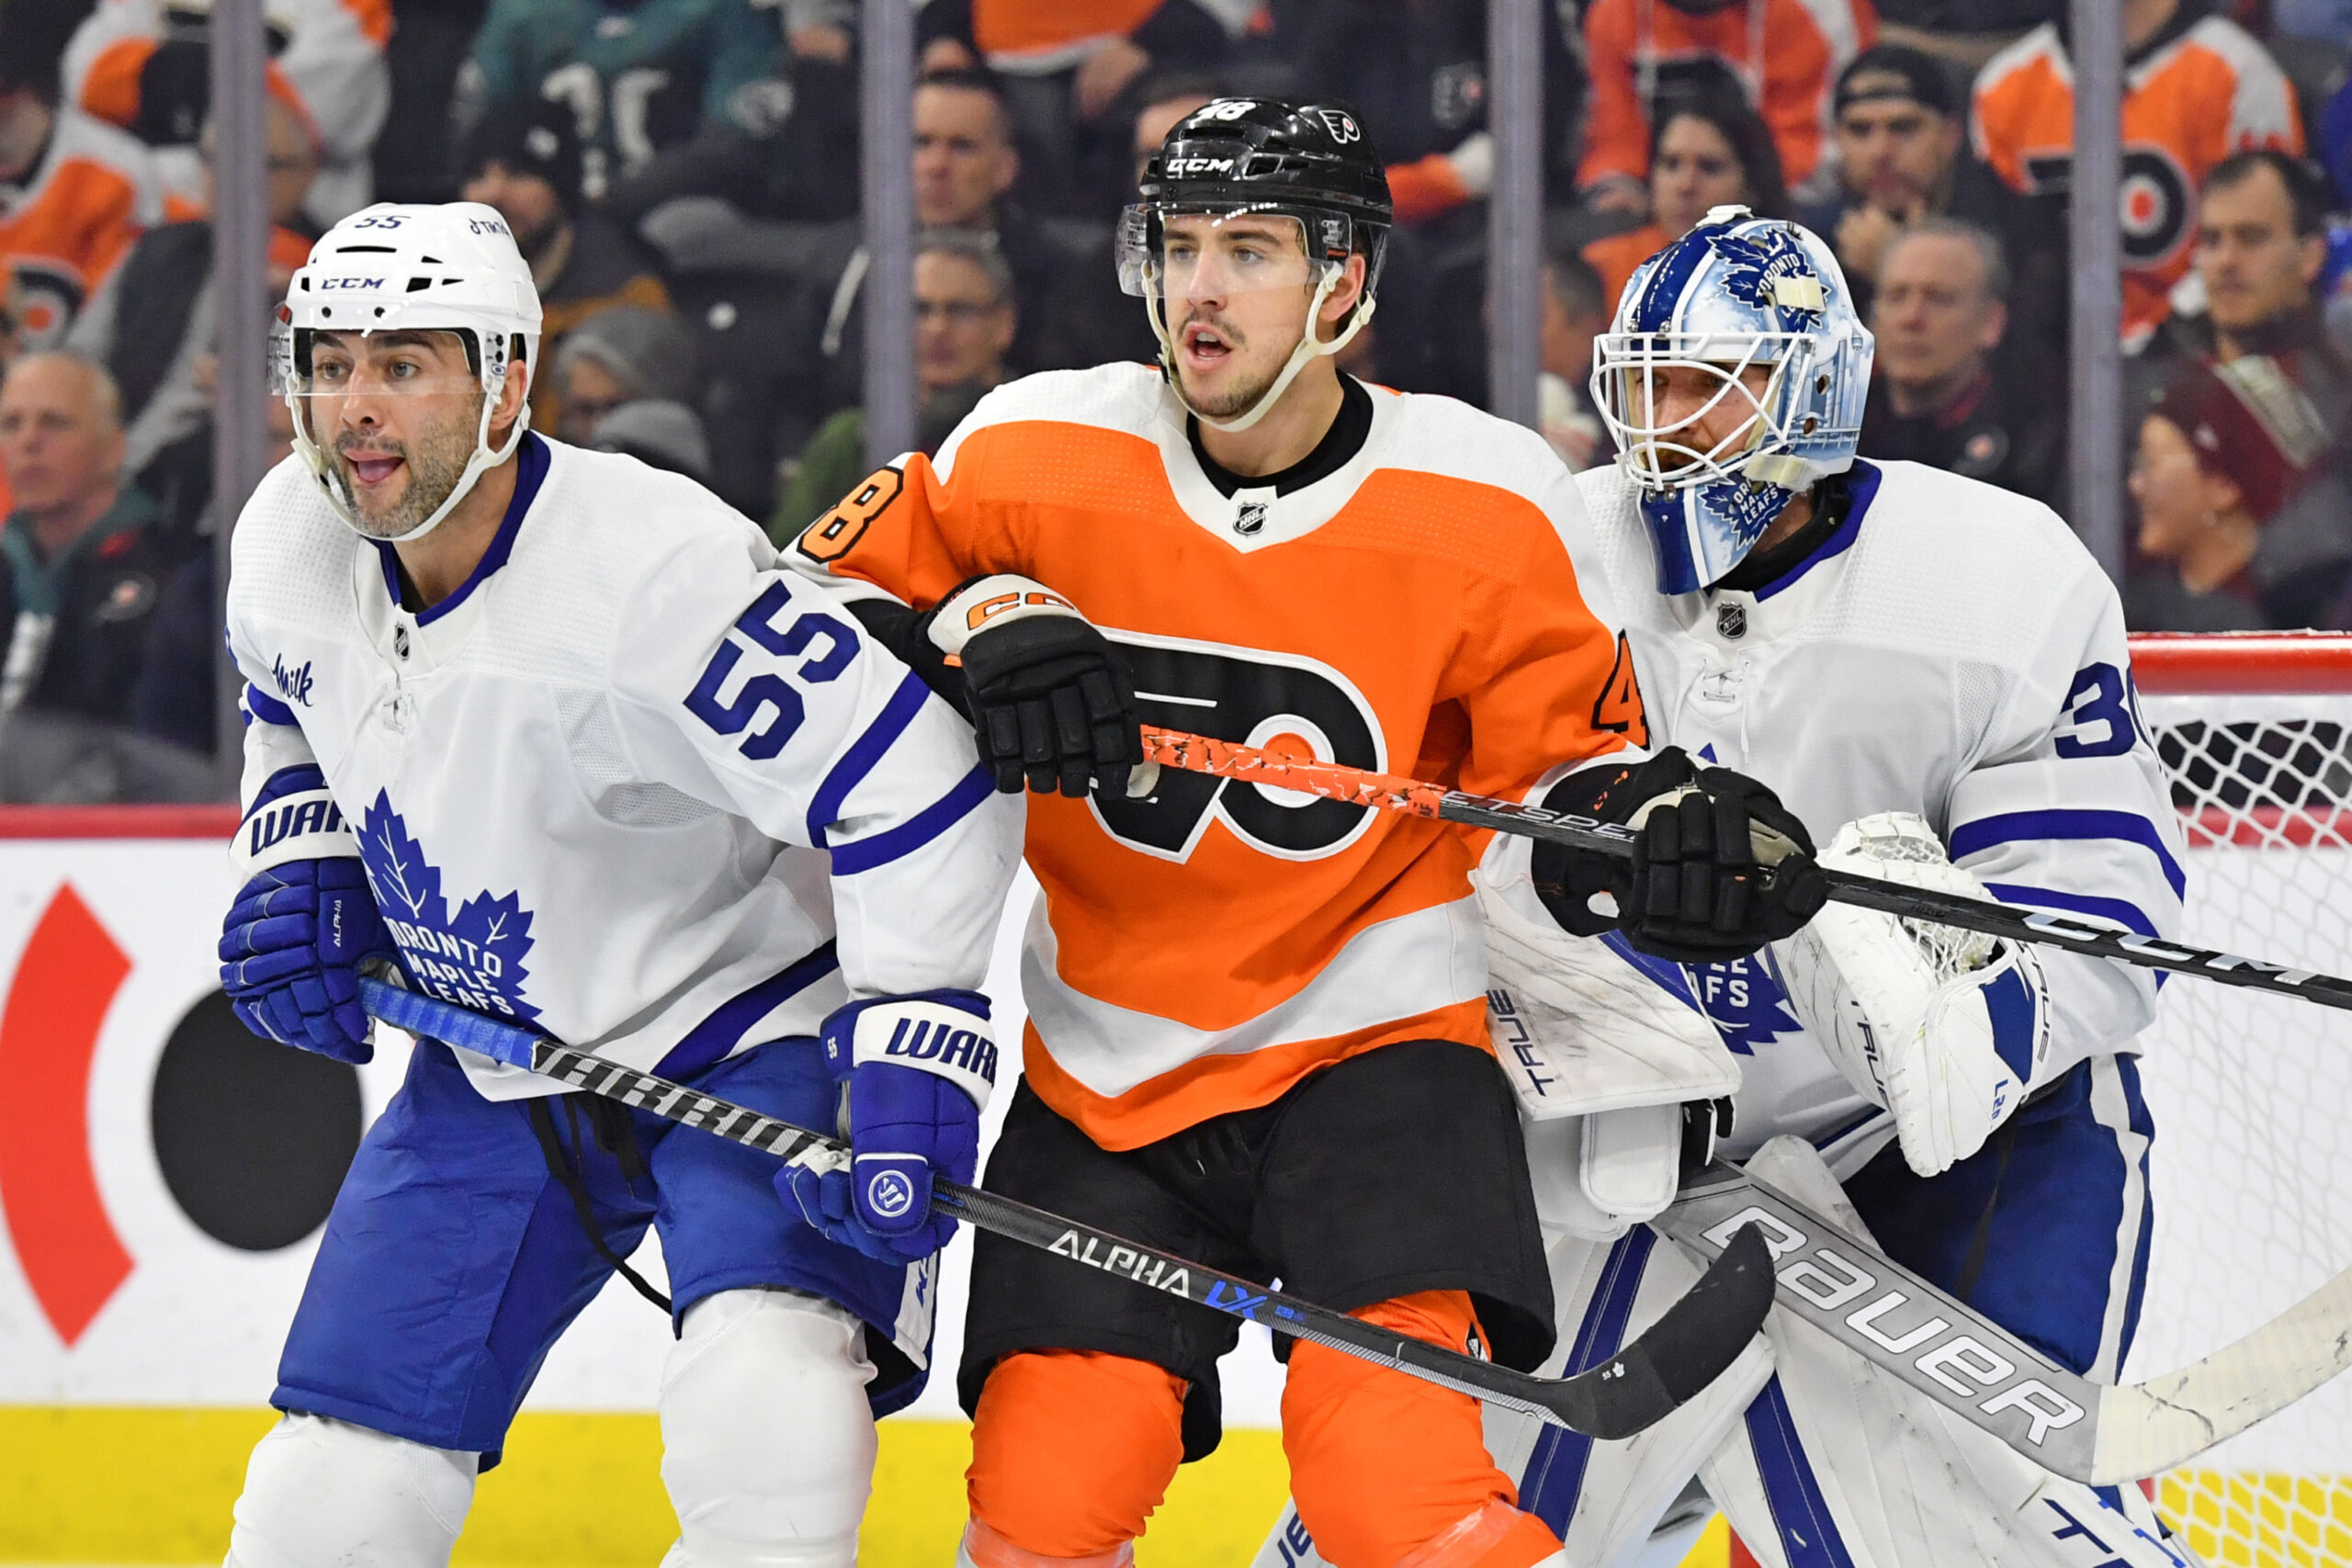 Morgan Frost deserves to stay with the Flyers – Philly Sports